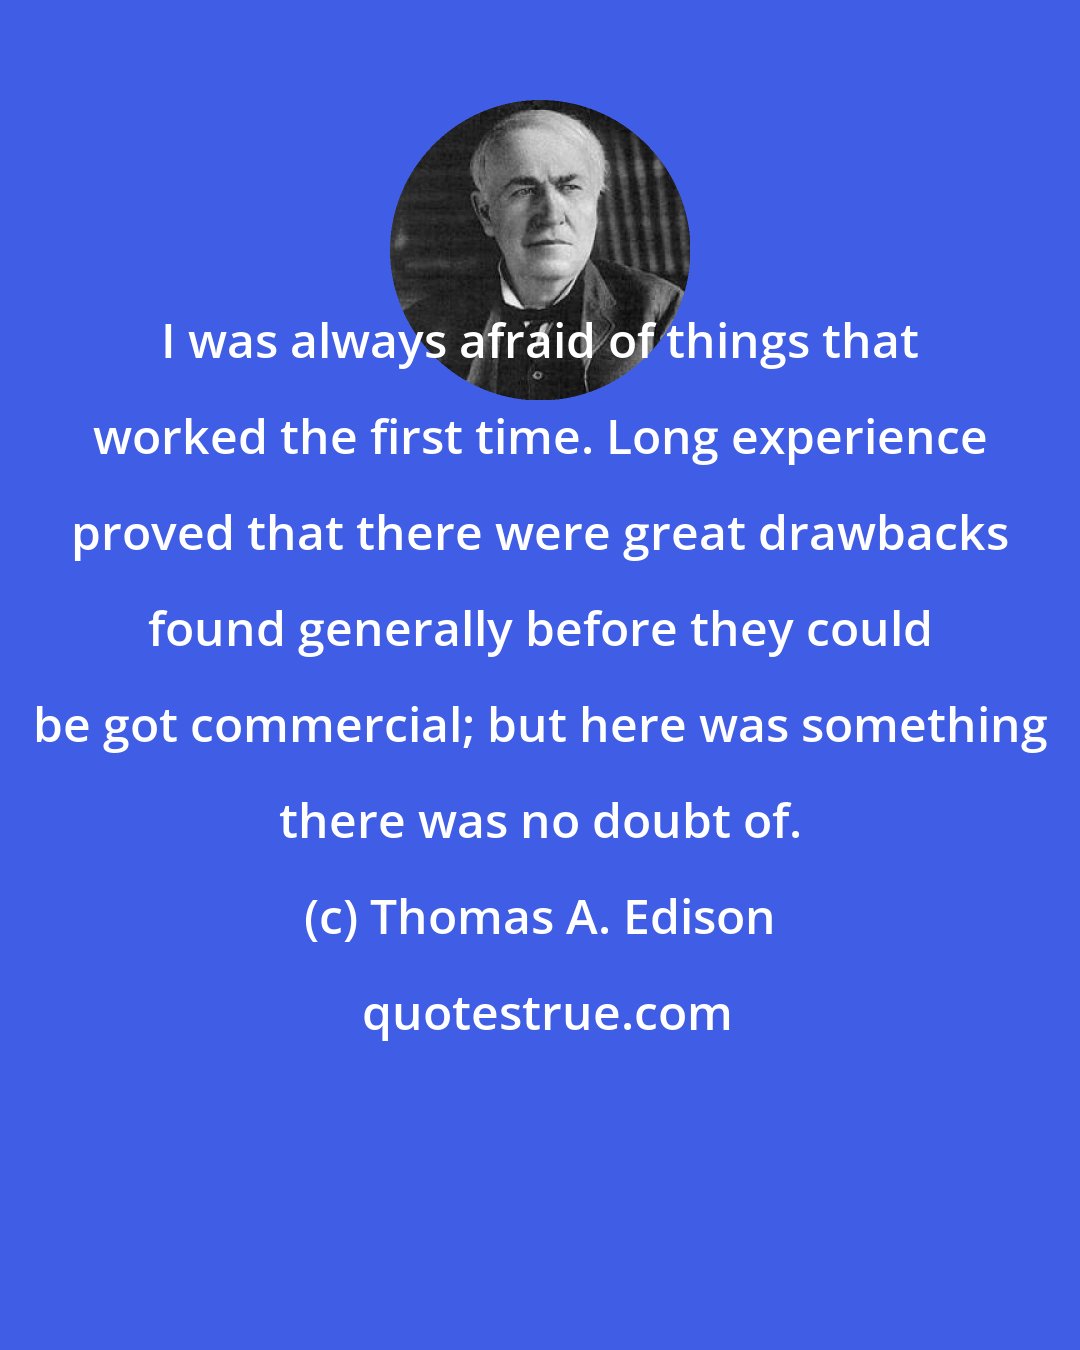 Thomas A. Edison: I was always afraid of things that worked the first time. Long experience proved that there were great drawbacks found generally before they could be got commercial; but here was something there was no doubt of.